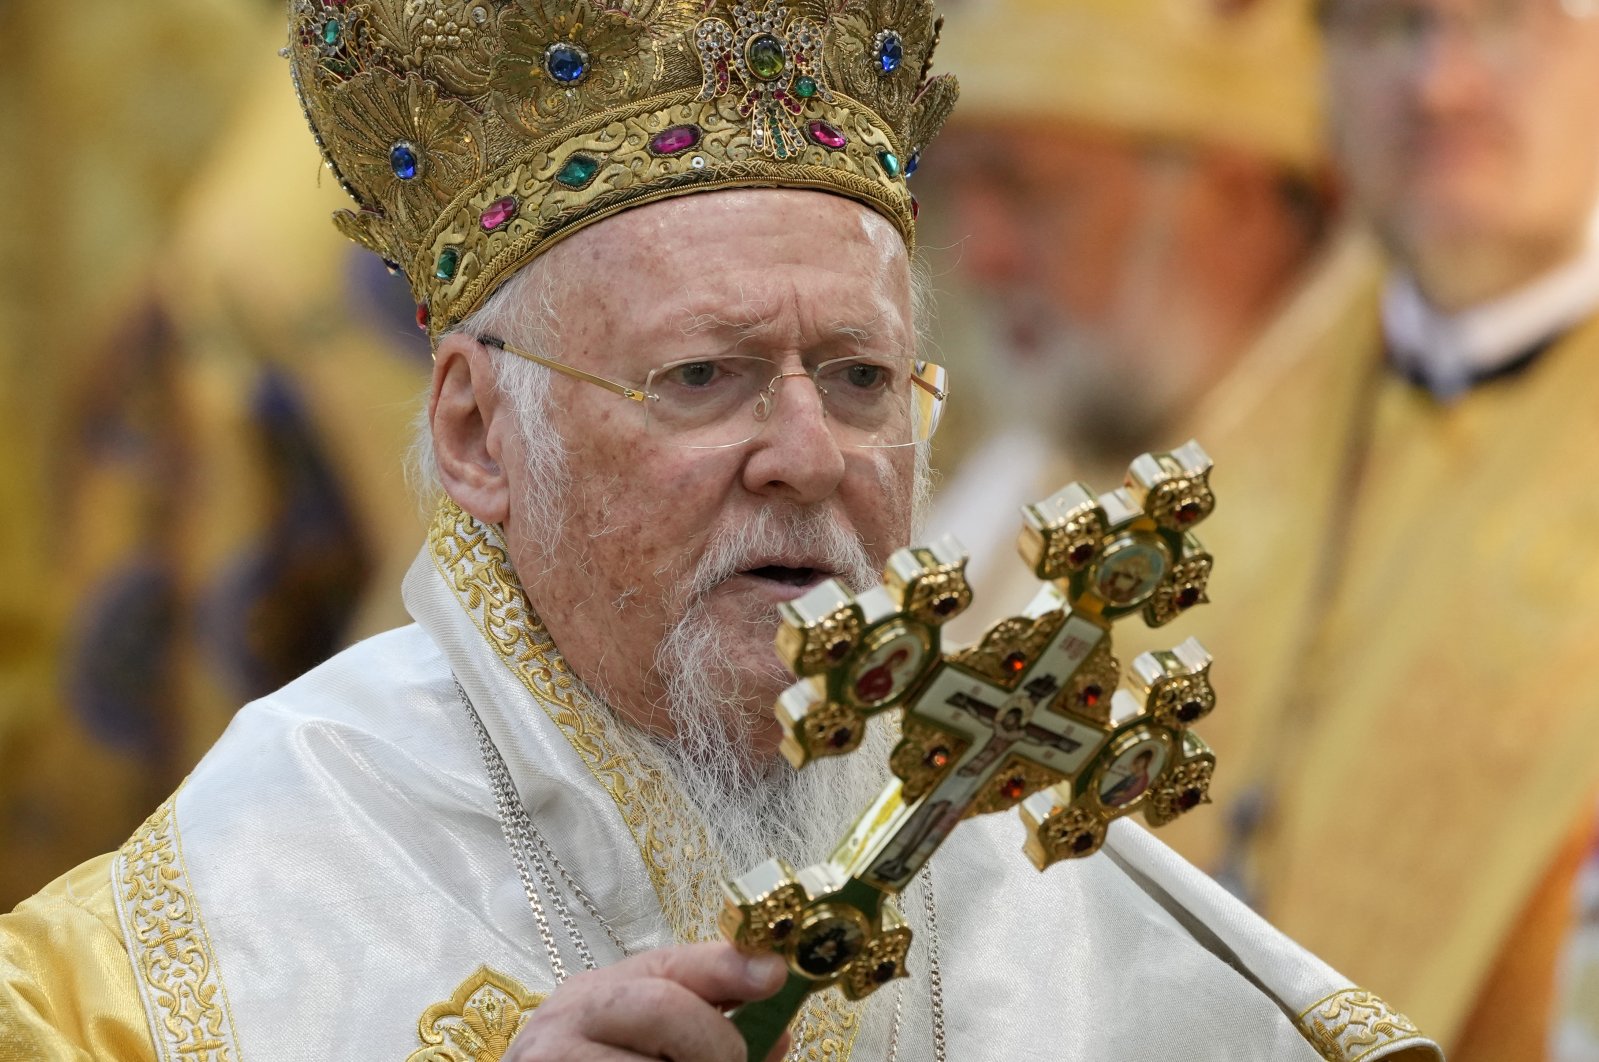 In this Sunday, Aug. 22, 2021 file photo, Patriarch Bartholomew I, the spiritual leader of the world's Orthodox Christians, leads a Mass at the St. Sofia Cathedral in Kyiv, Ukraine. (AP File Photo)